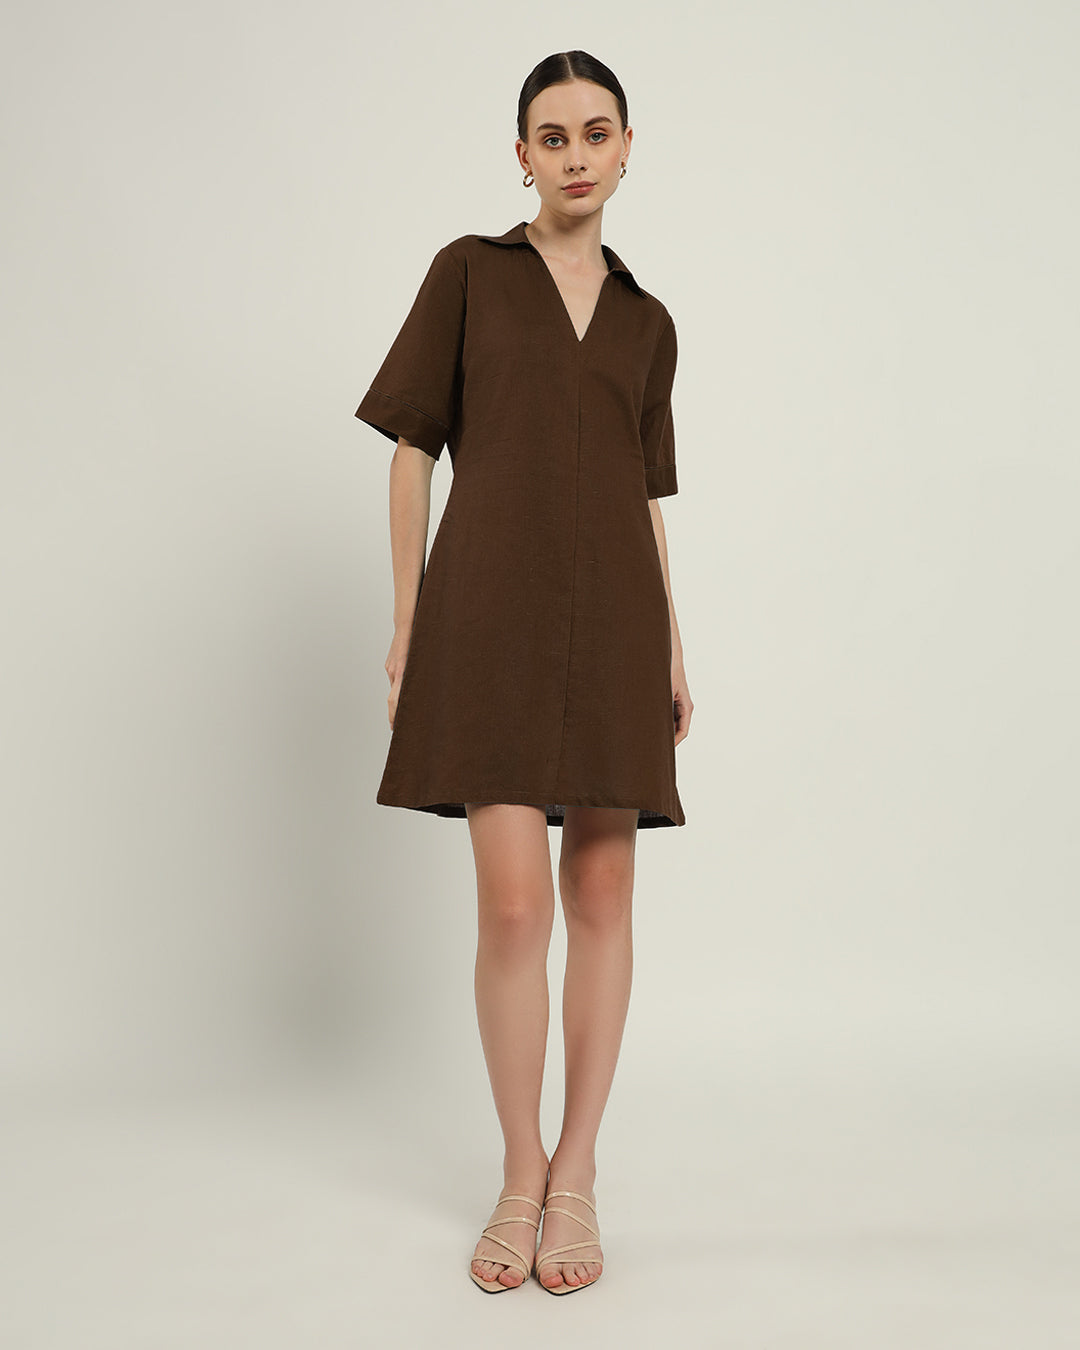 The Ermont Nutshell Cotton Dress